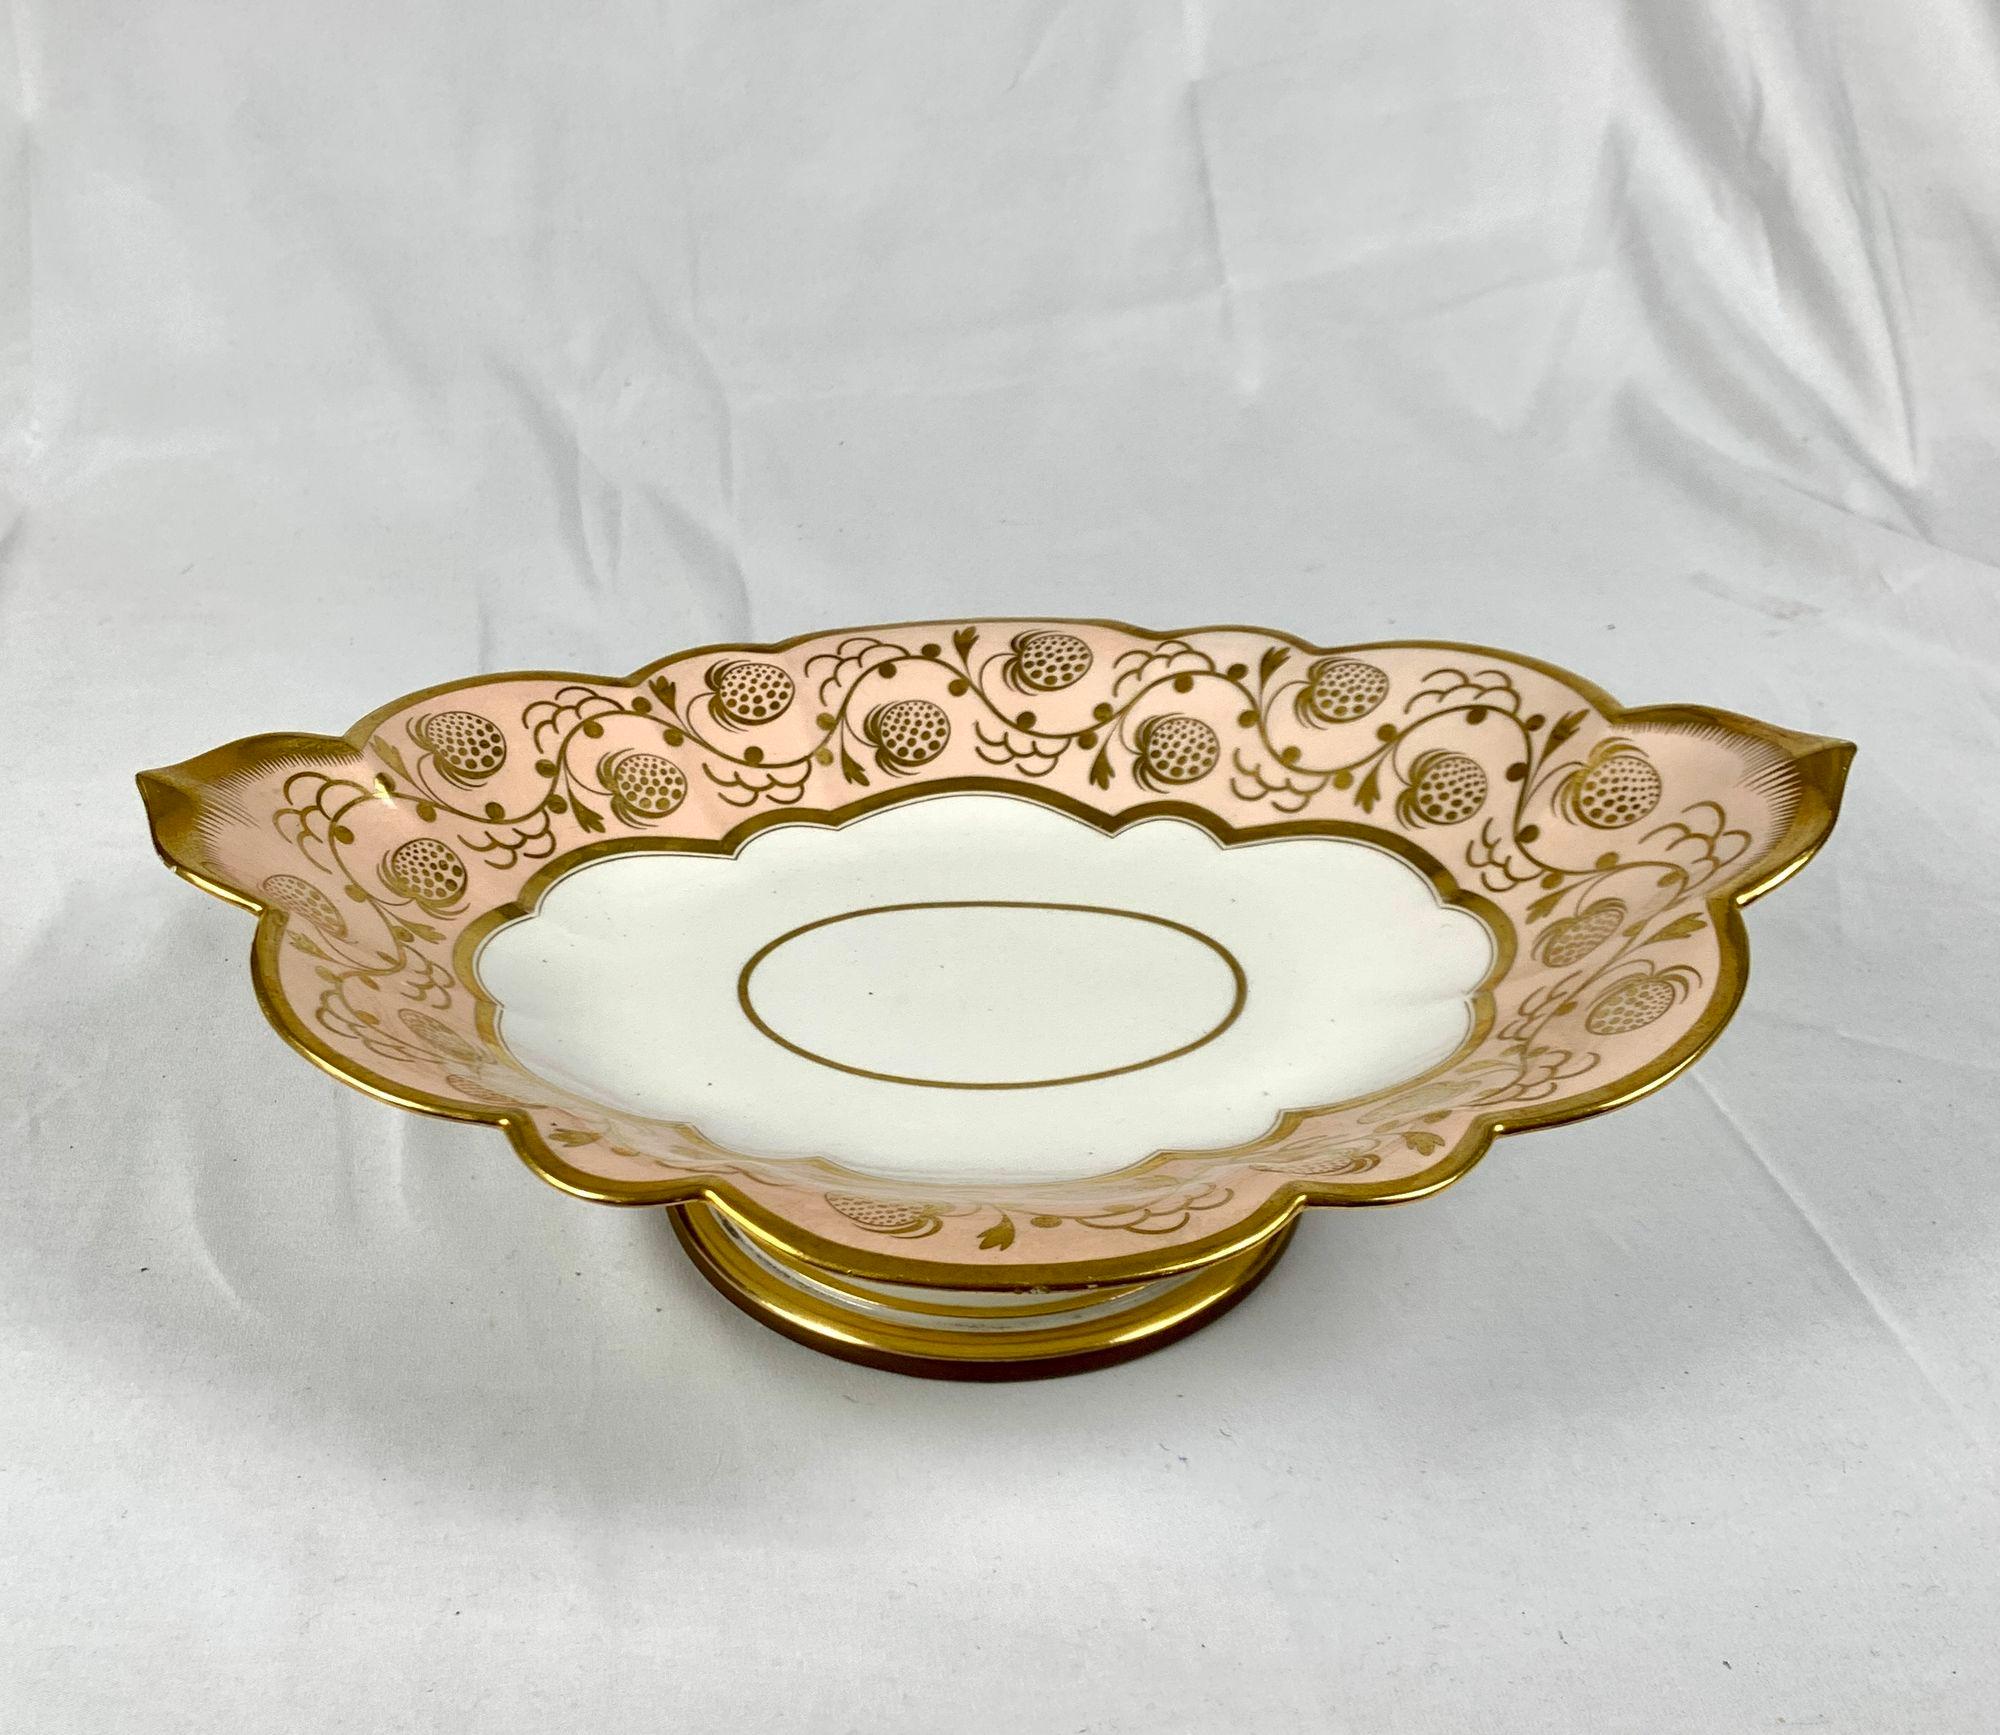 Antique Worcester Porcelain Dessert Service Decorated in Gold England C-1820 In Excellent Condition For Sale In Katonah, NY